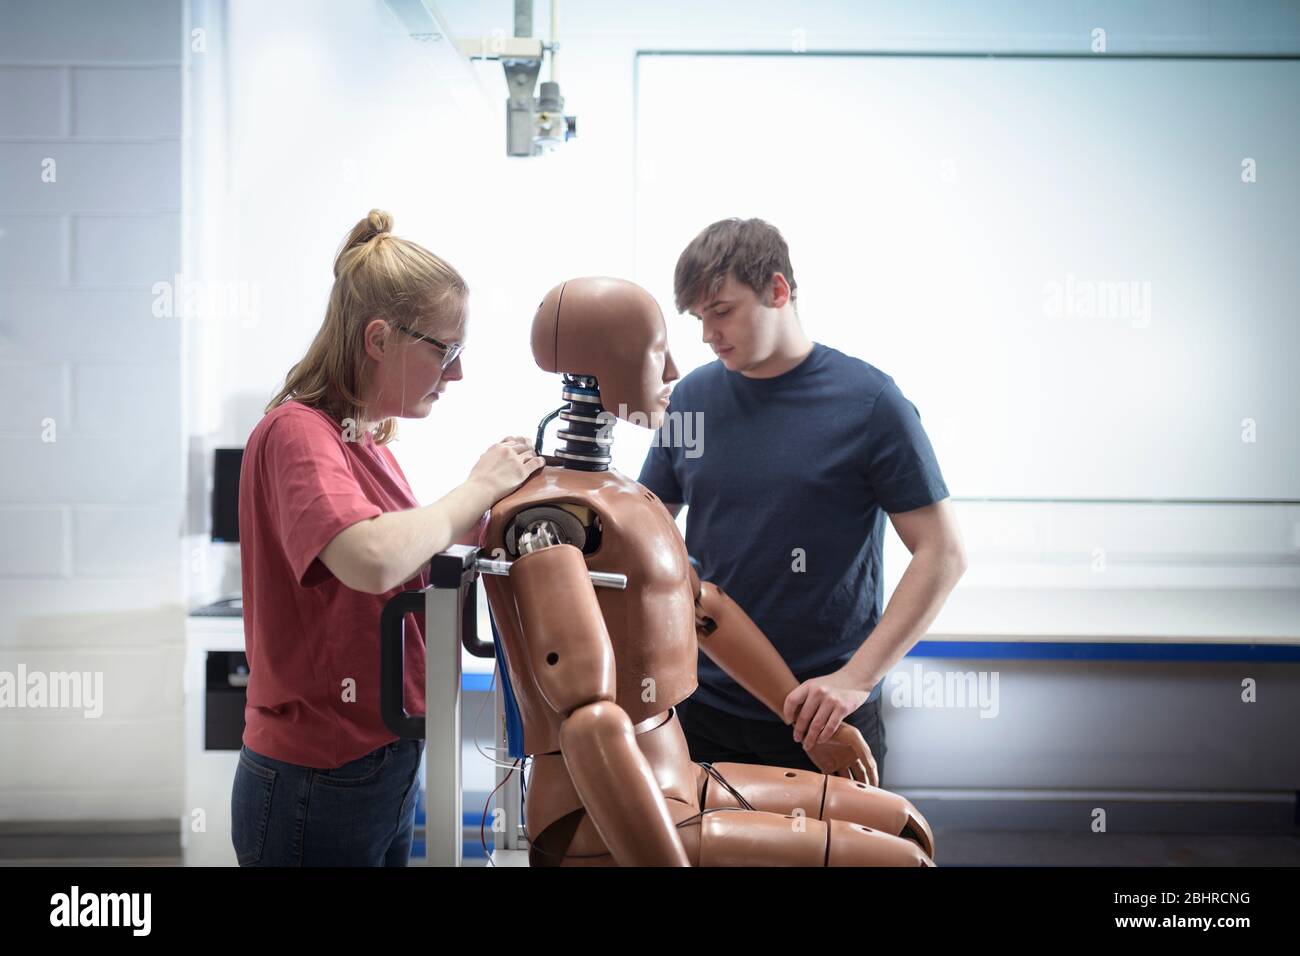 Two students working on a test dummy in a workshop. Stock Photo